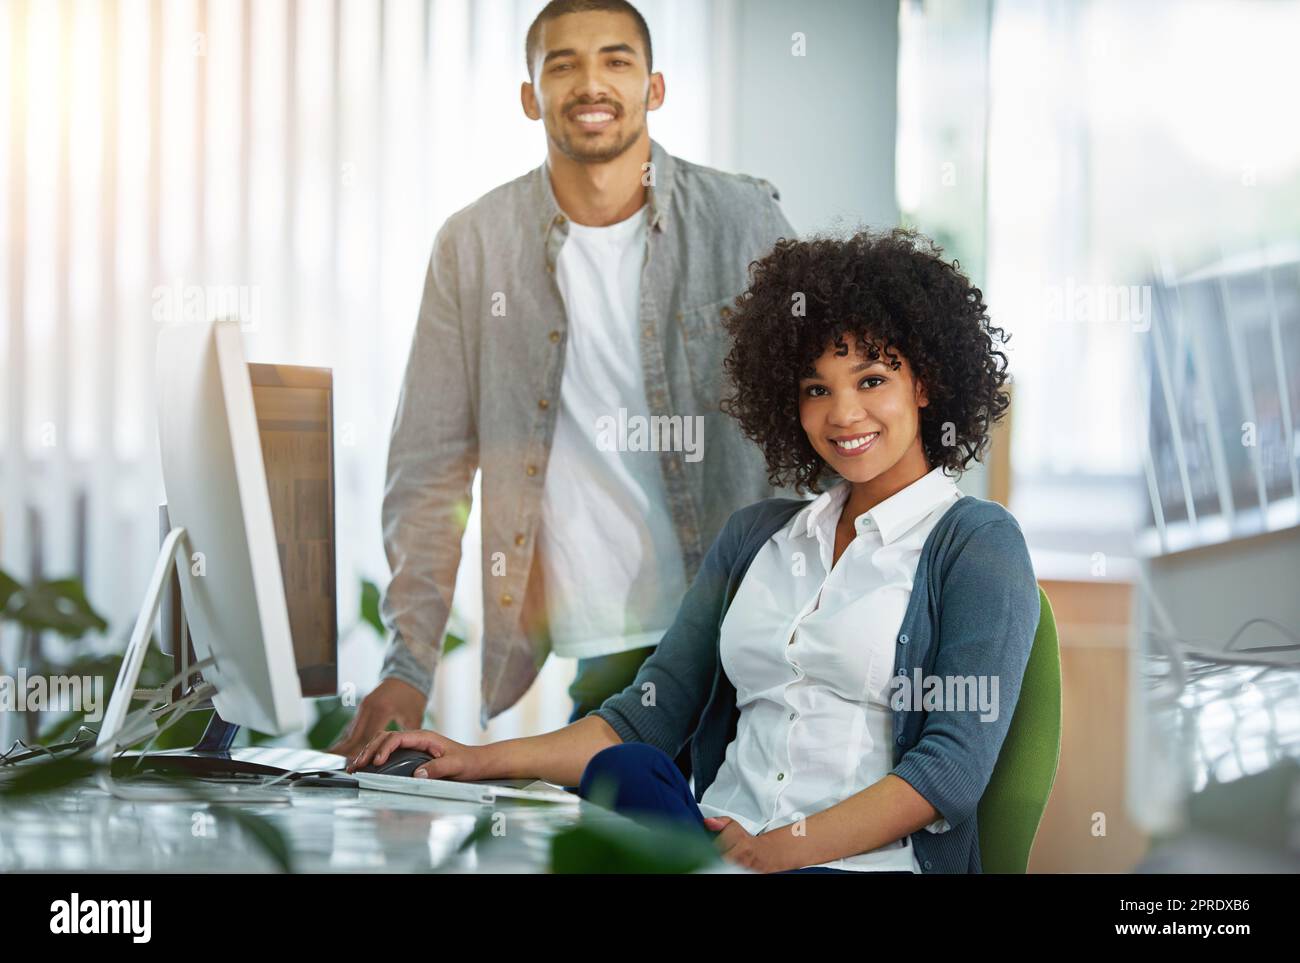 Happy manager or leader helping an employee on a computer to plan ideas or business growth strategy. African female intern or trainee working for a startup and training in the IT department Stock Photo